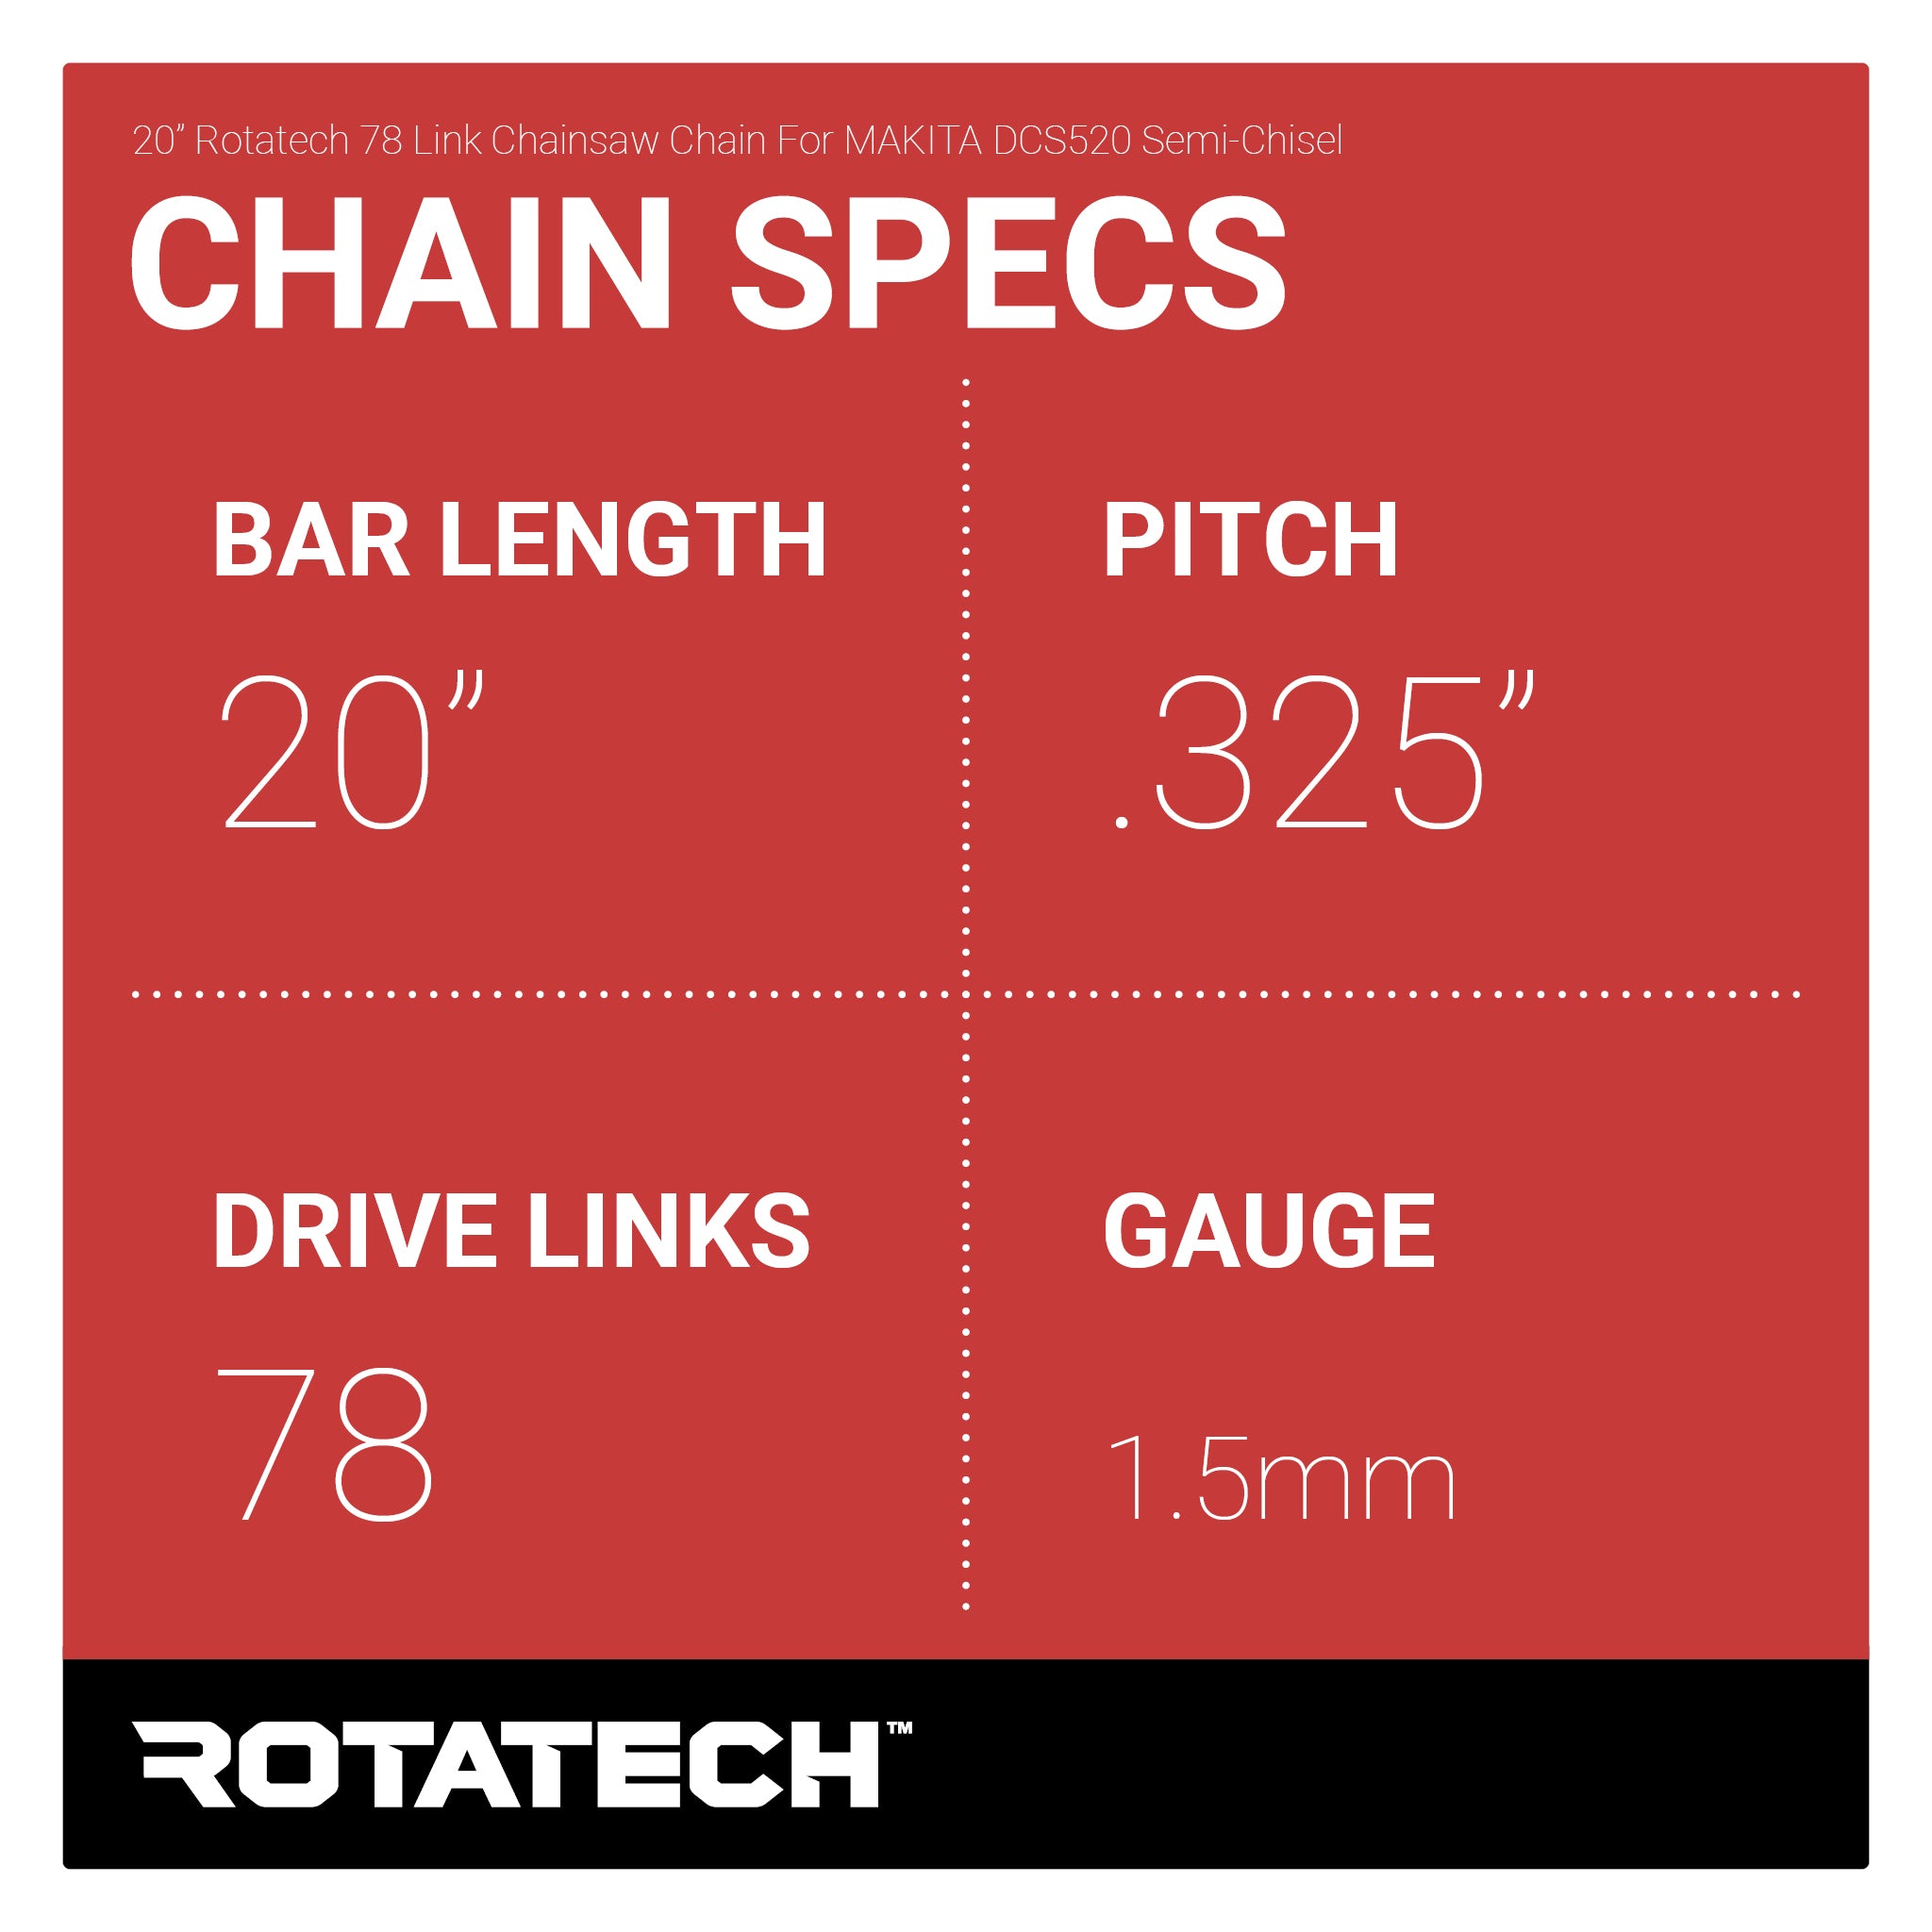 20" Rotatech 78 Link Chainsaw Chain For MAKITA DCS520 Semi-Chisel Chain Specs